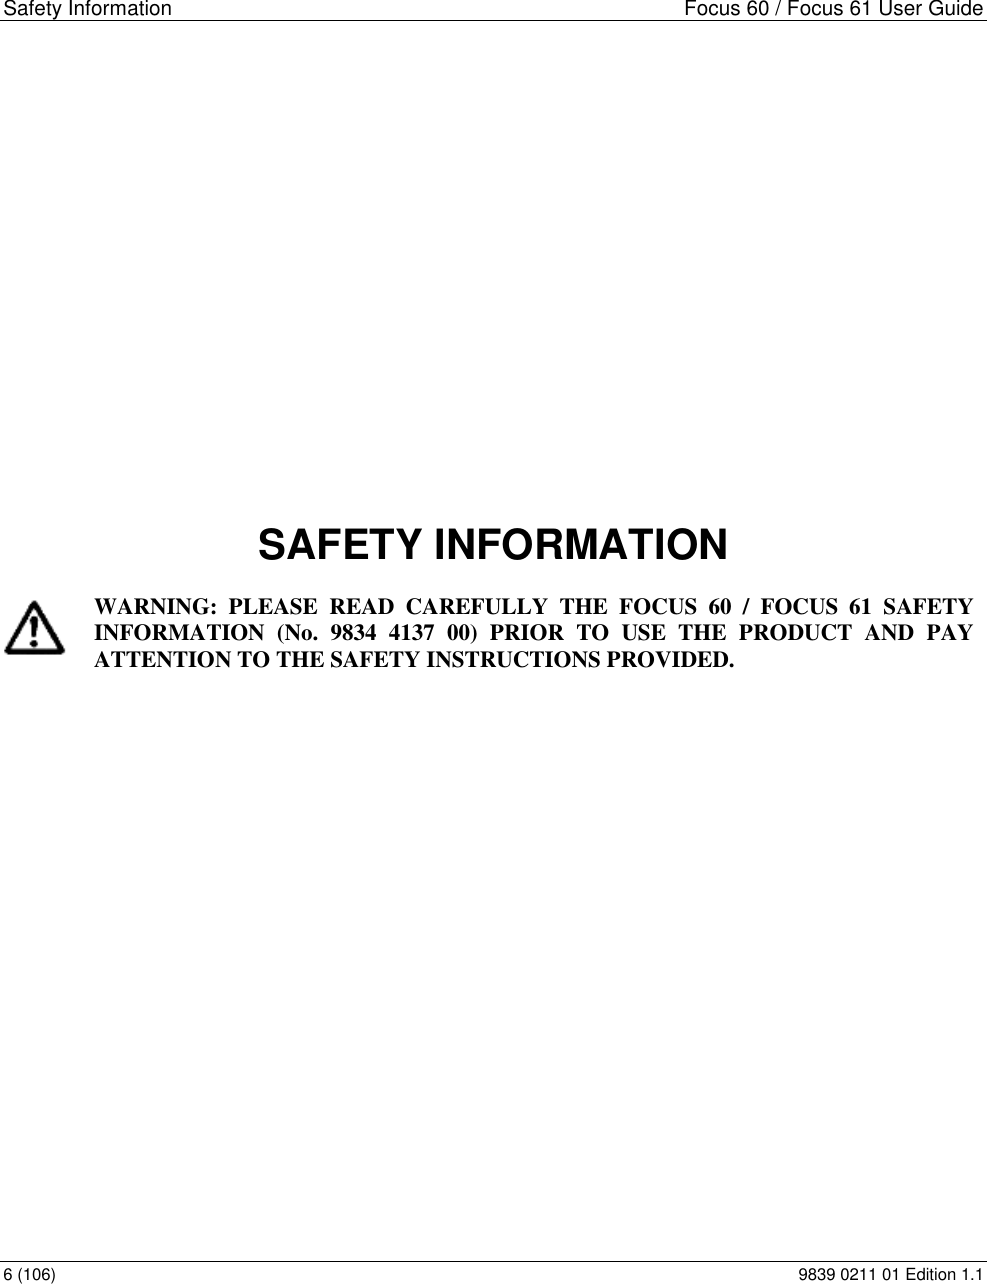 Safety Information  Focus 60 / Focus 61 User Guide 6 (106)  9839 0211 01 Edition 1.1           SAFETY INFORMATION  WARNING:  PLEASE  READ  CAREFULLY  THE  FOCUS  60  /  FOCUS  61  SAFETY INFORMATION  (No.  9834  4137  00)  PRIOR  TO  USE  THE  PRODUCT  AND  PAY ATTENTION TO THE SAFETY INSTRUCTIONS PROVIDED.  